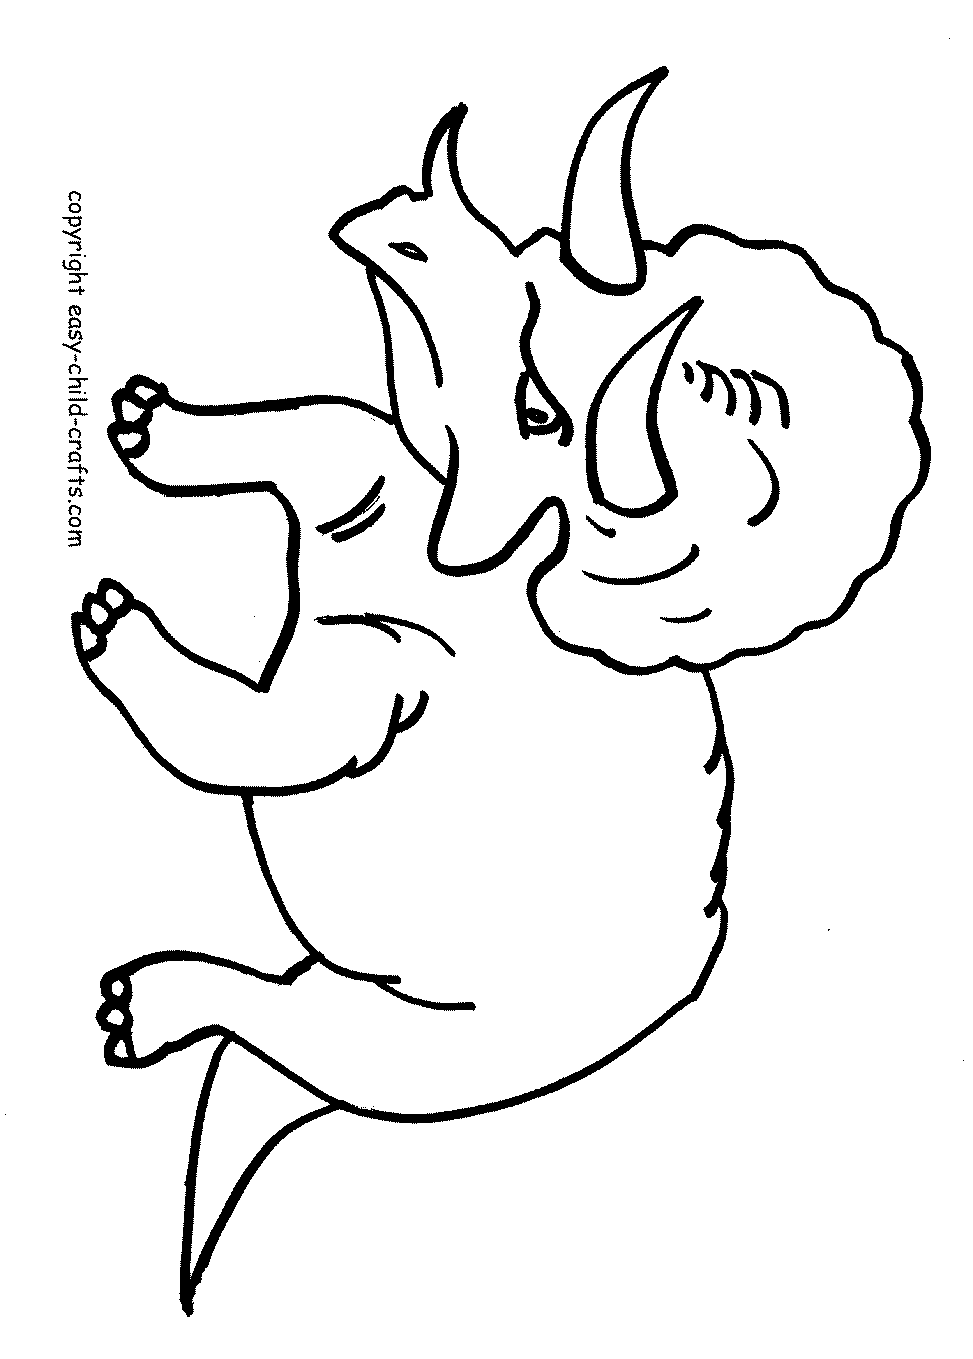 Download Coloring Book Pictures Of Dinosaurs - 68+ SVG File for Silhouette for Cricut, Silhouette and Other Machine